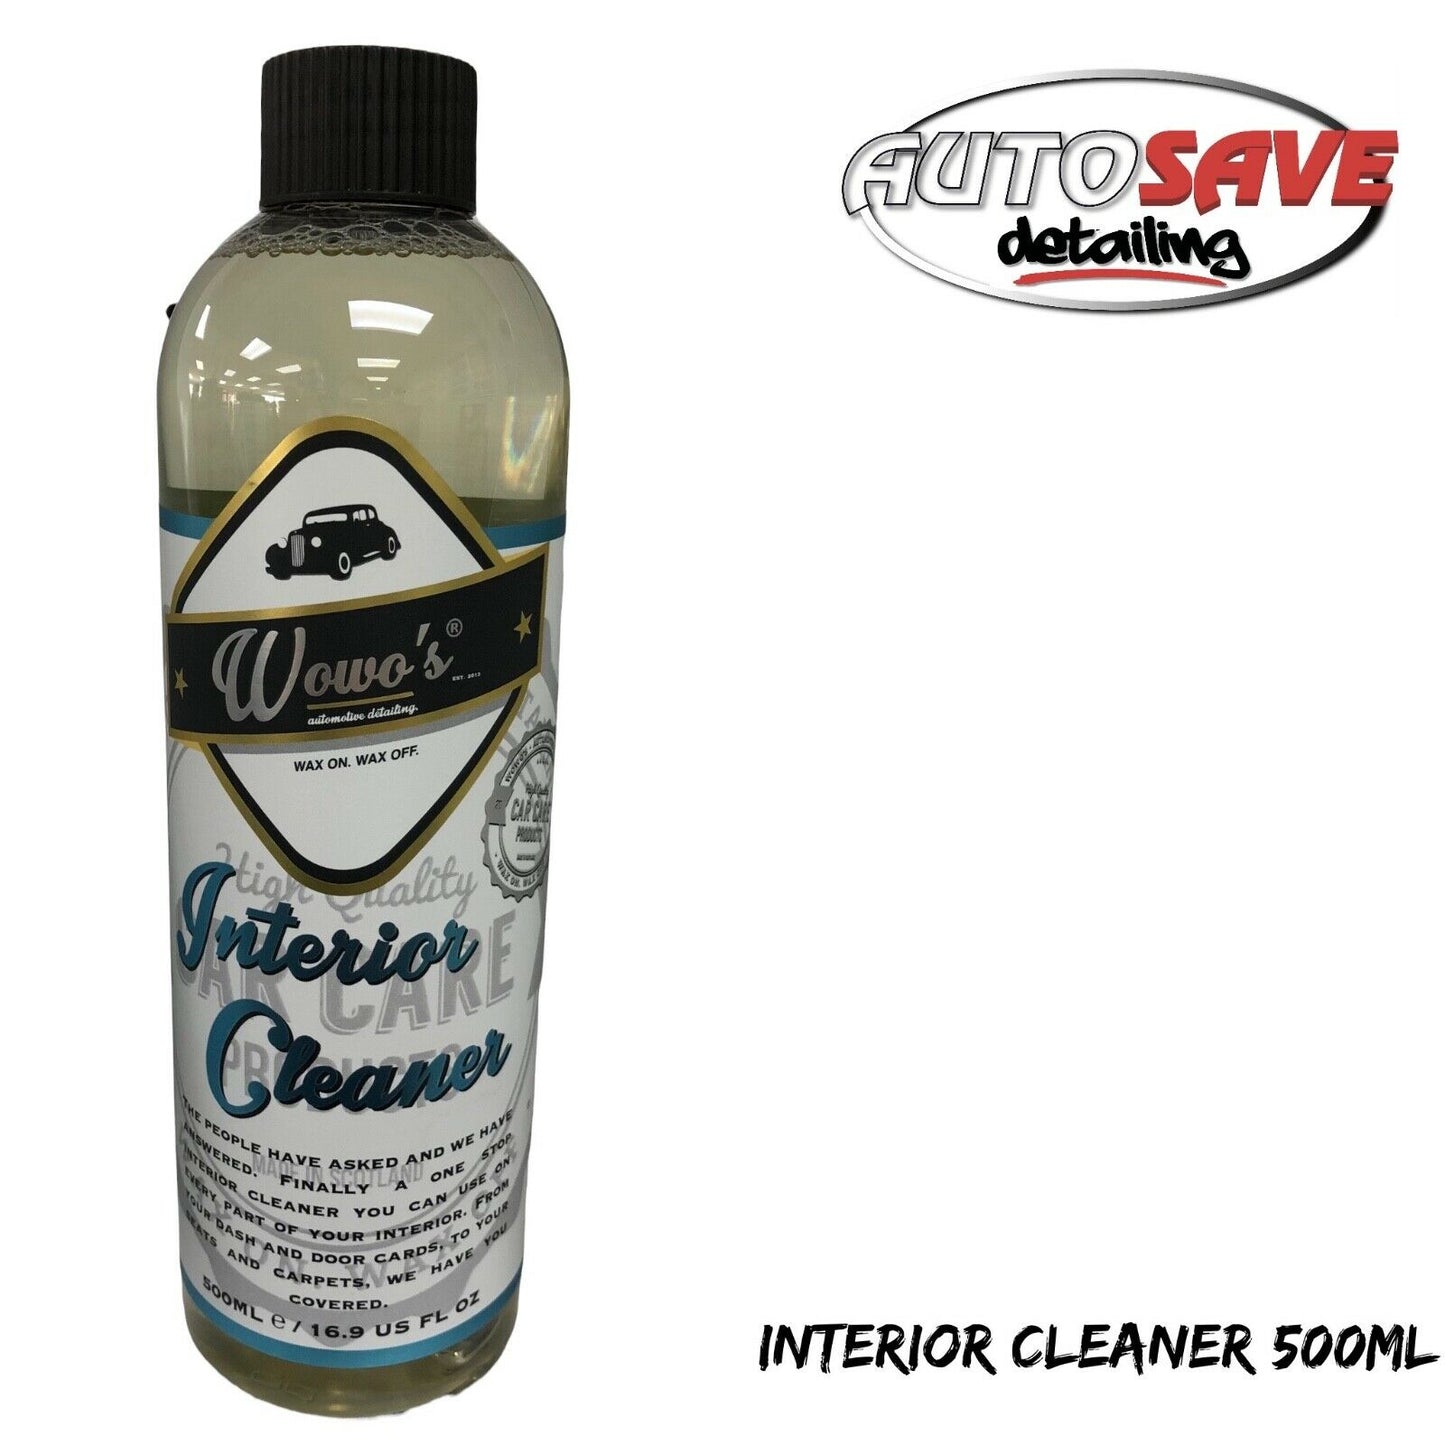 Wowo's Interior Cleaner 500ml